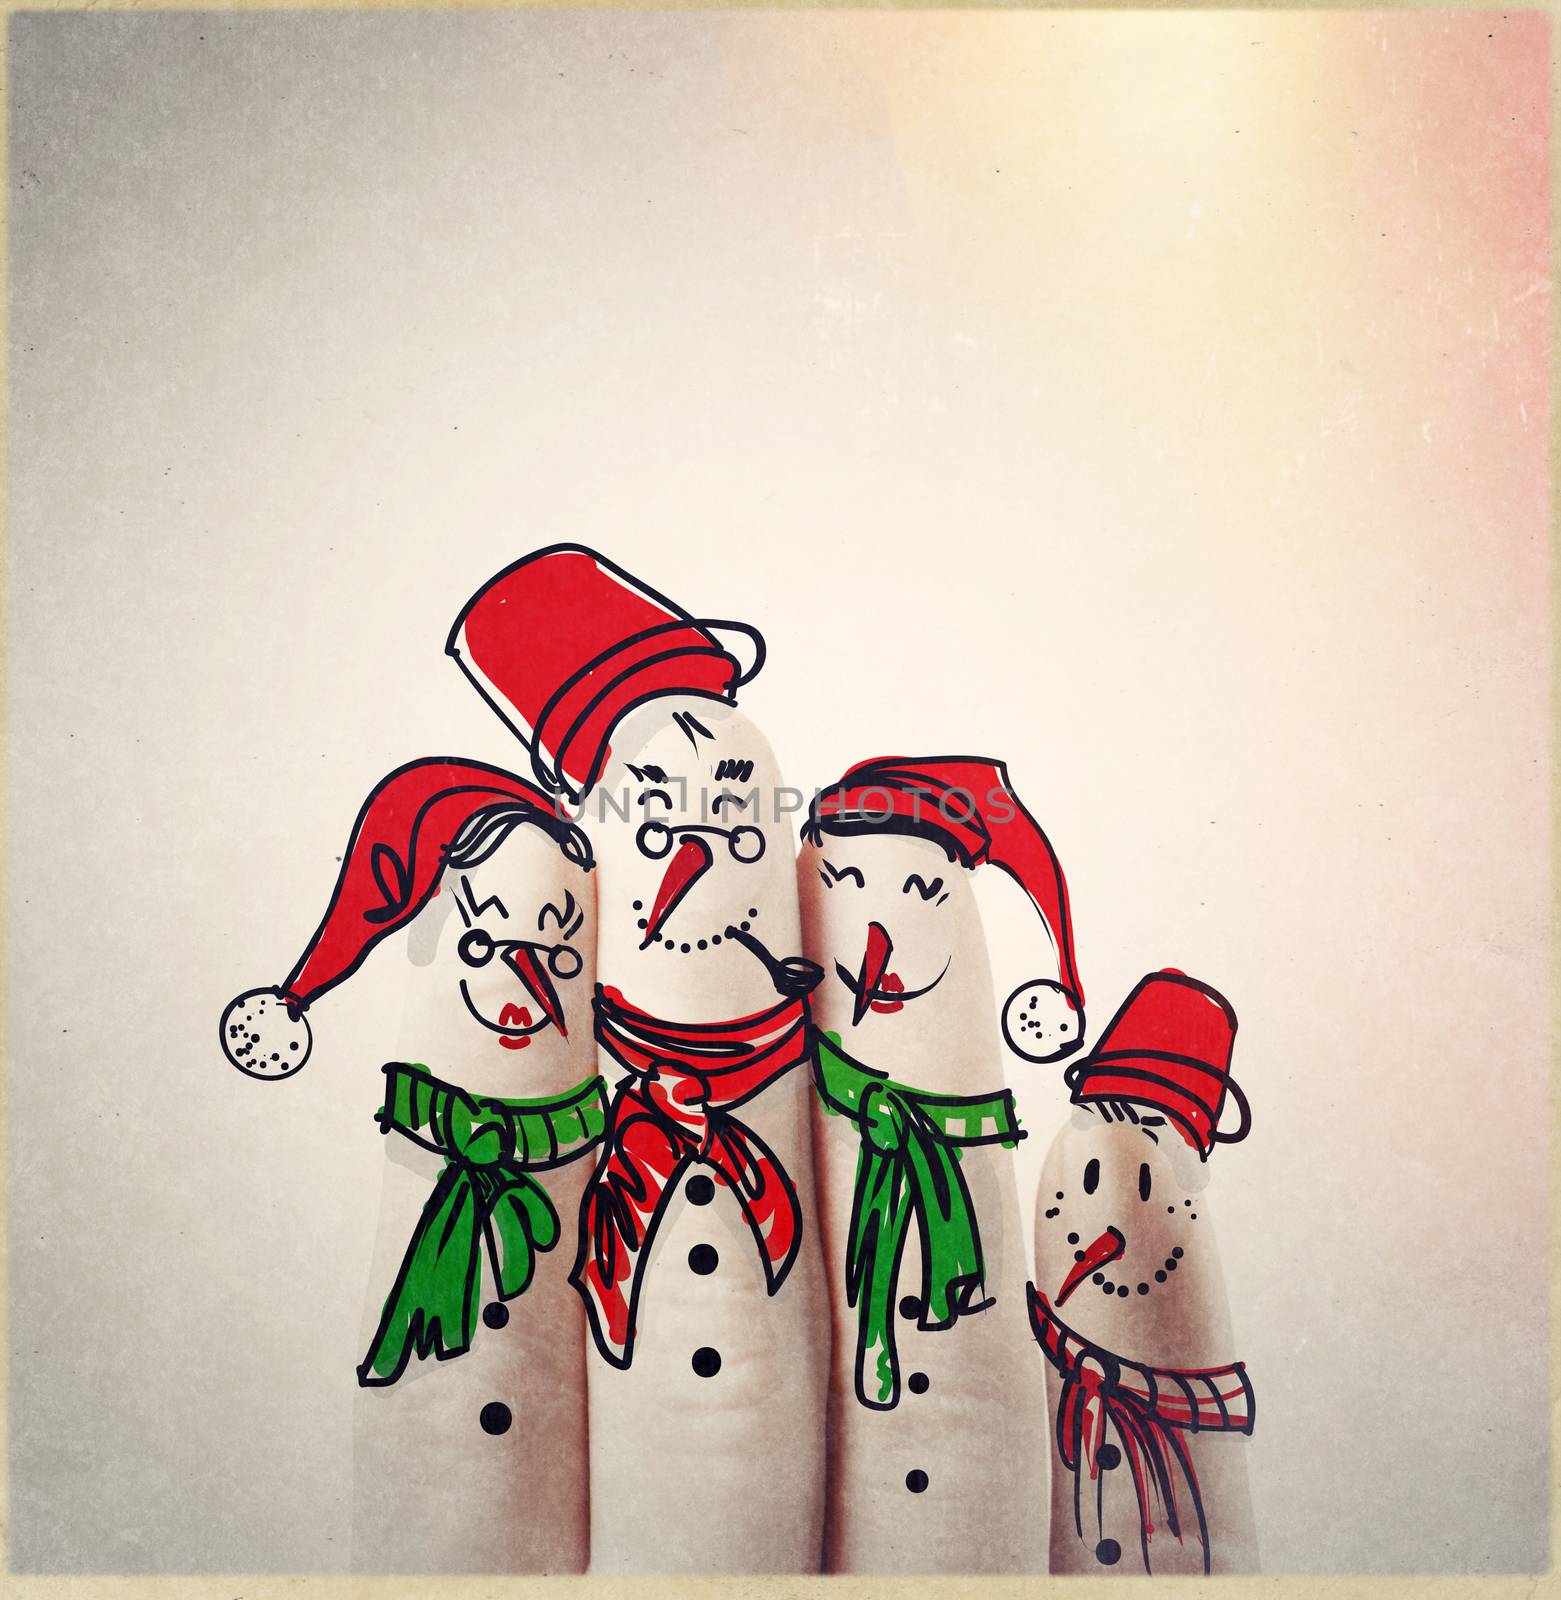 A lovely family hand drawn and finger of snowmen,as concept idea